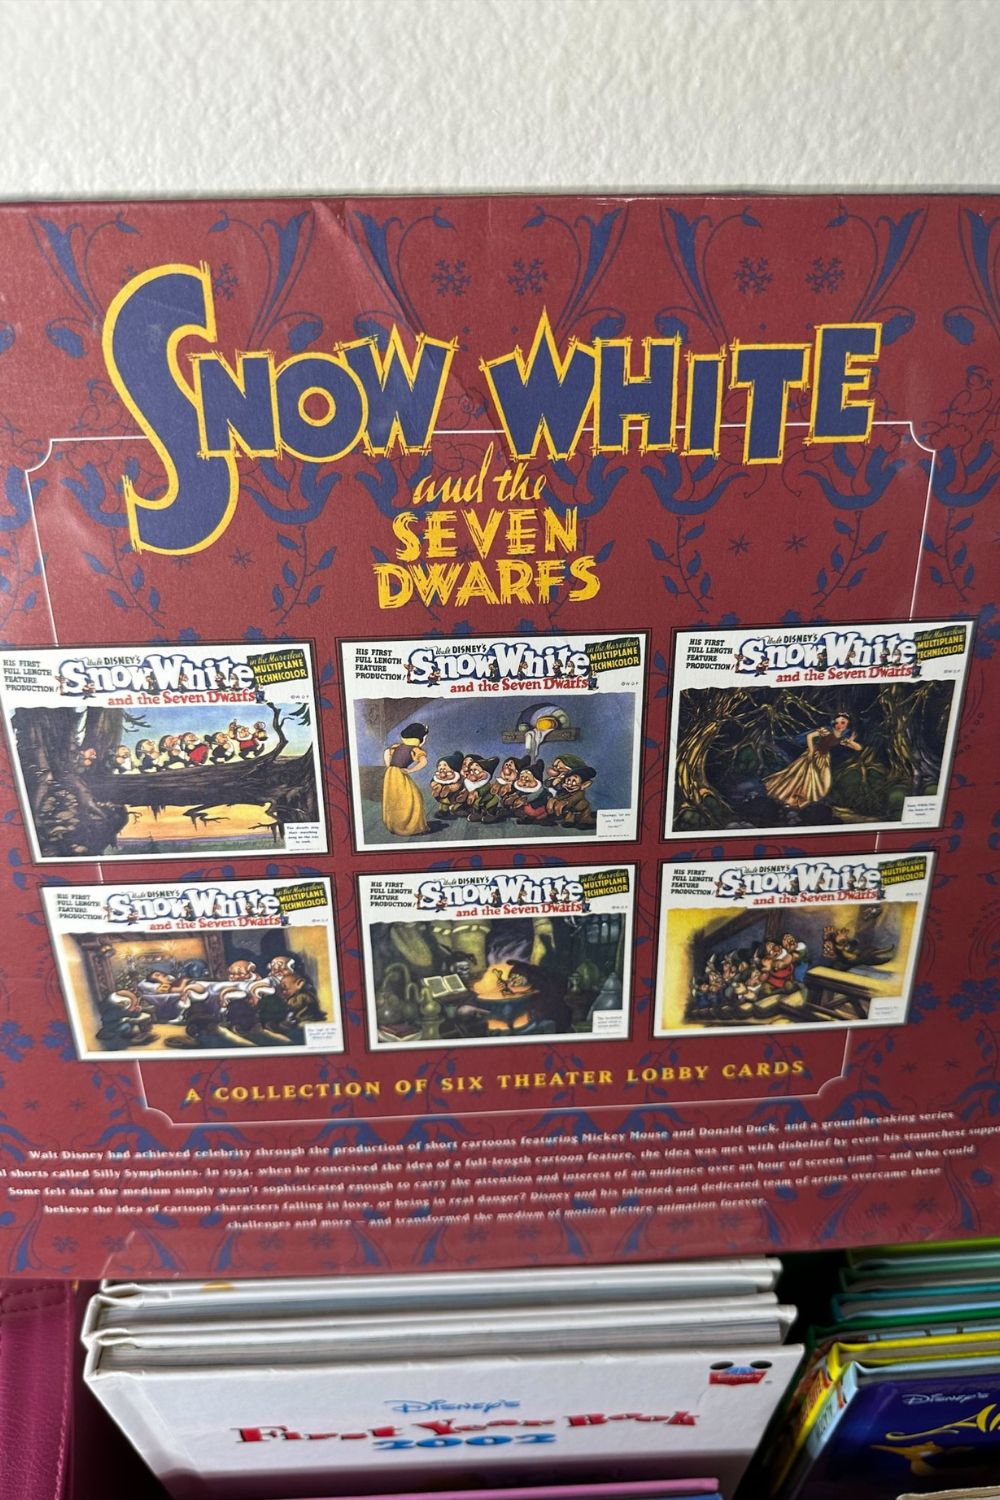 SNOW WHITE AND THE SEVEN DWARFS SET OF 6 LOBBY CARDS (SEALED)*